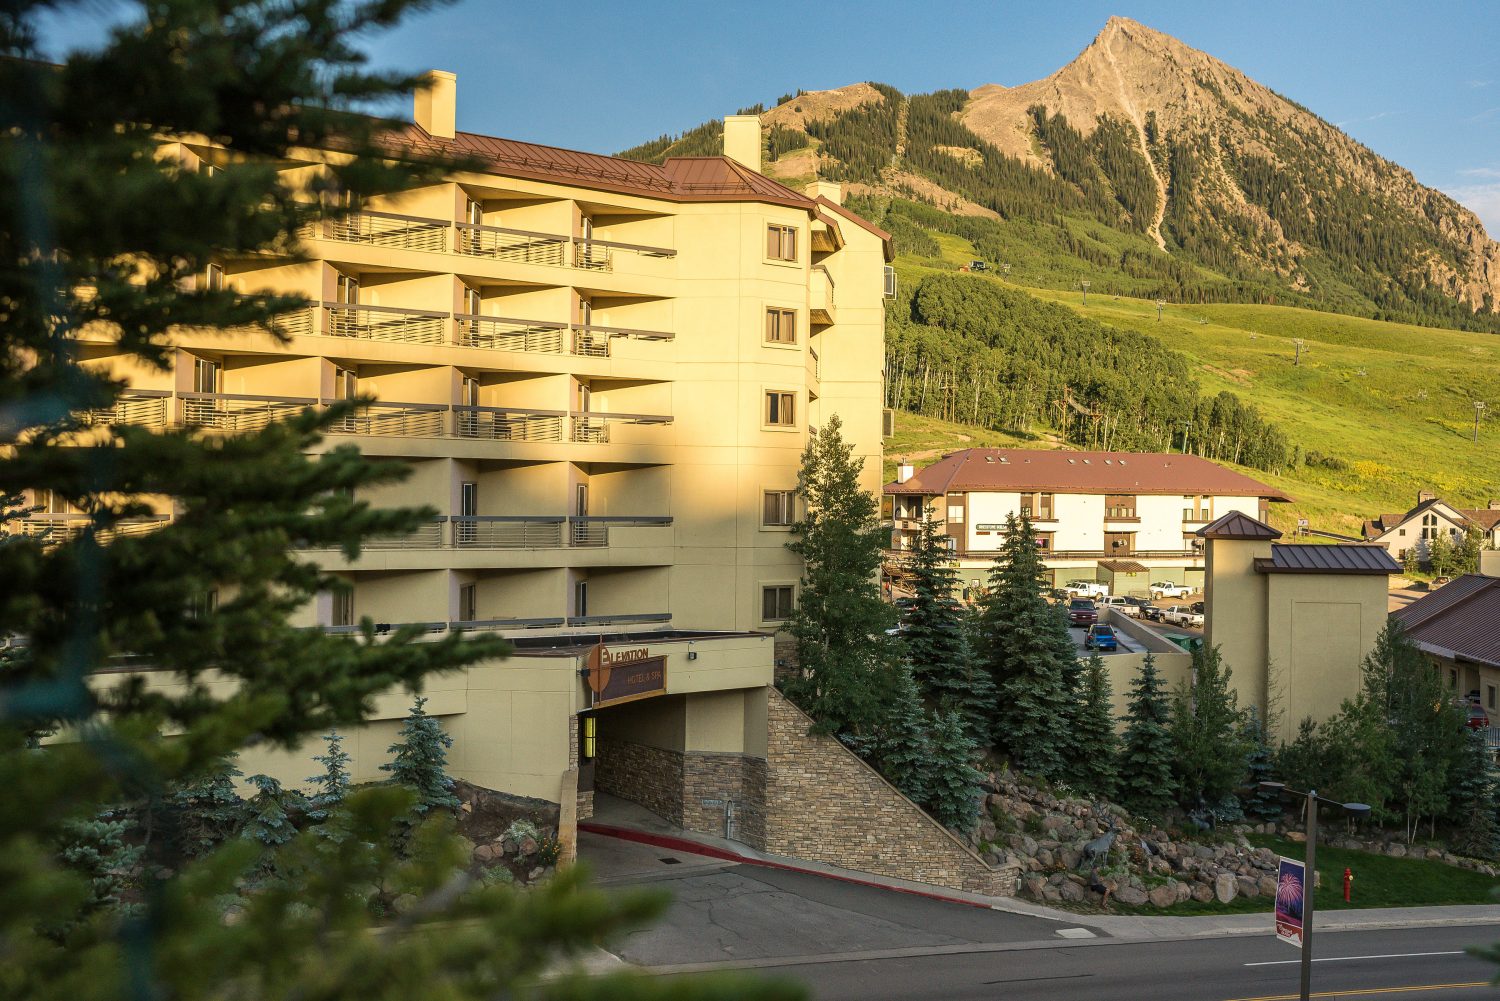 Pet friendly hotels crested butte